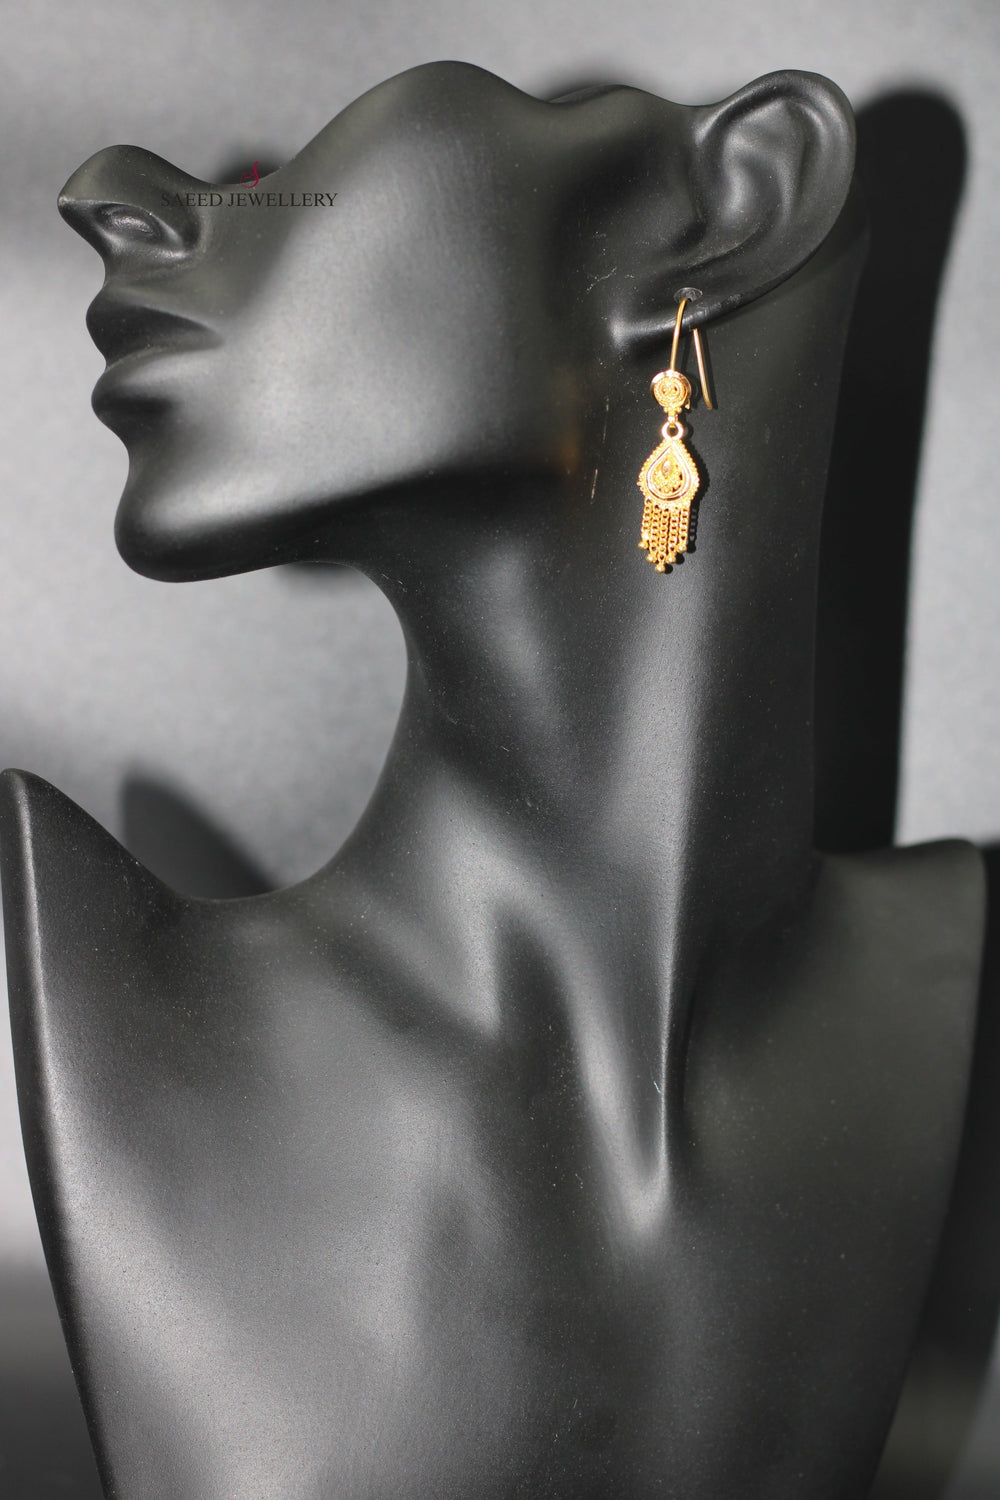 21K Hindi Earrings Made of 21K Yellow Gold by Saeed Jewelry-حلق-هندي-1